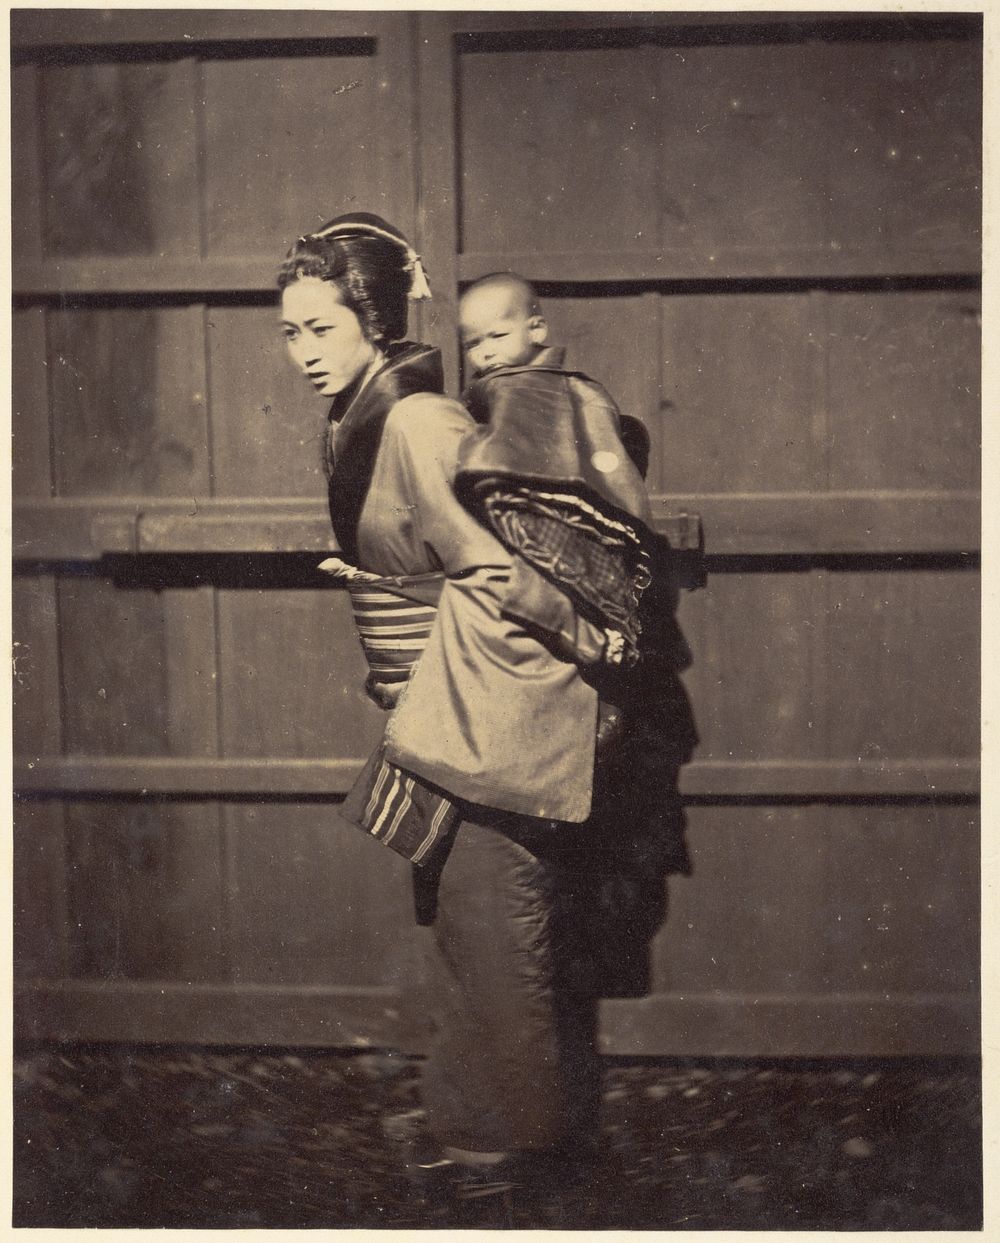 Japanese Woman Carrying a Child by Felice Beato